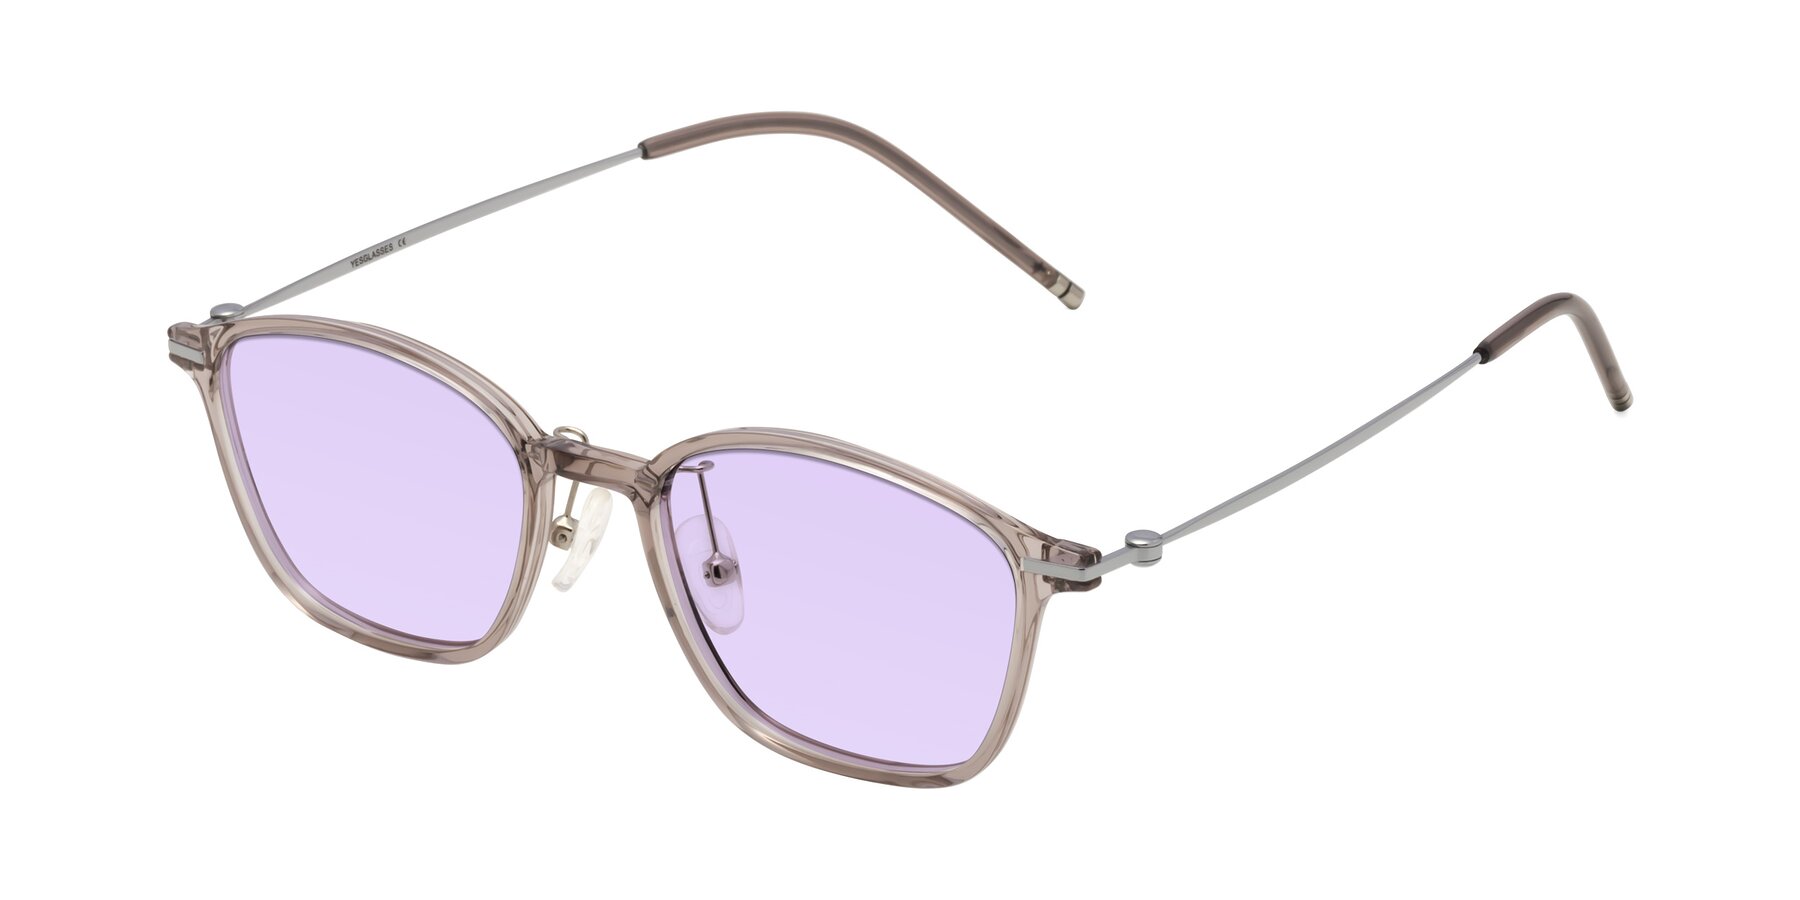 Angle of Cato in Earl Gray with Light Purple Tinted Lenses